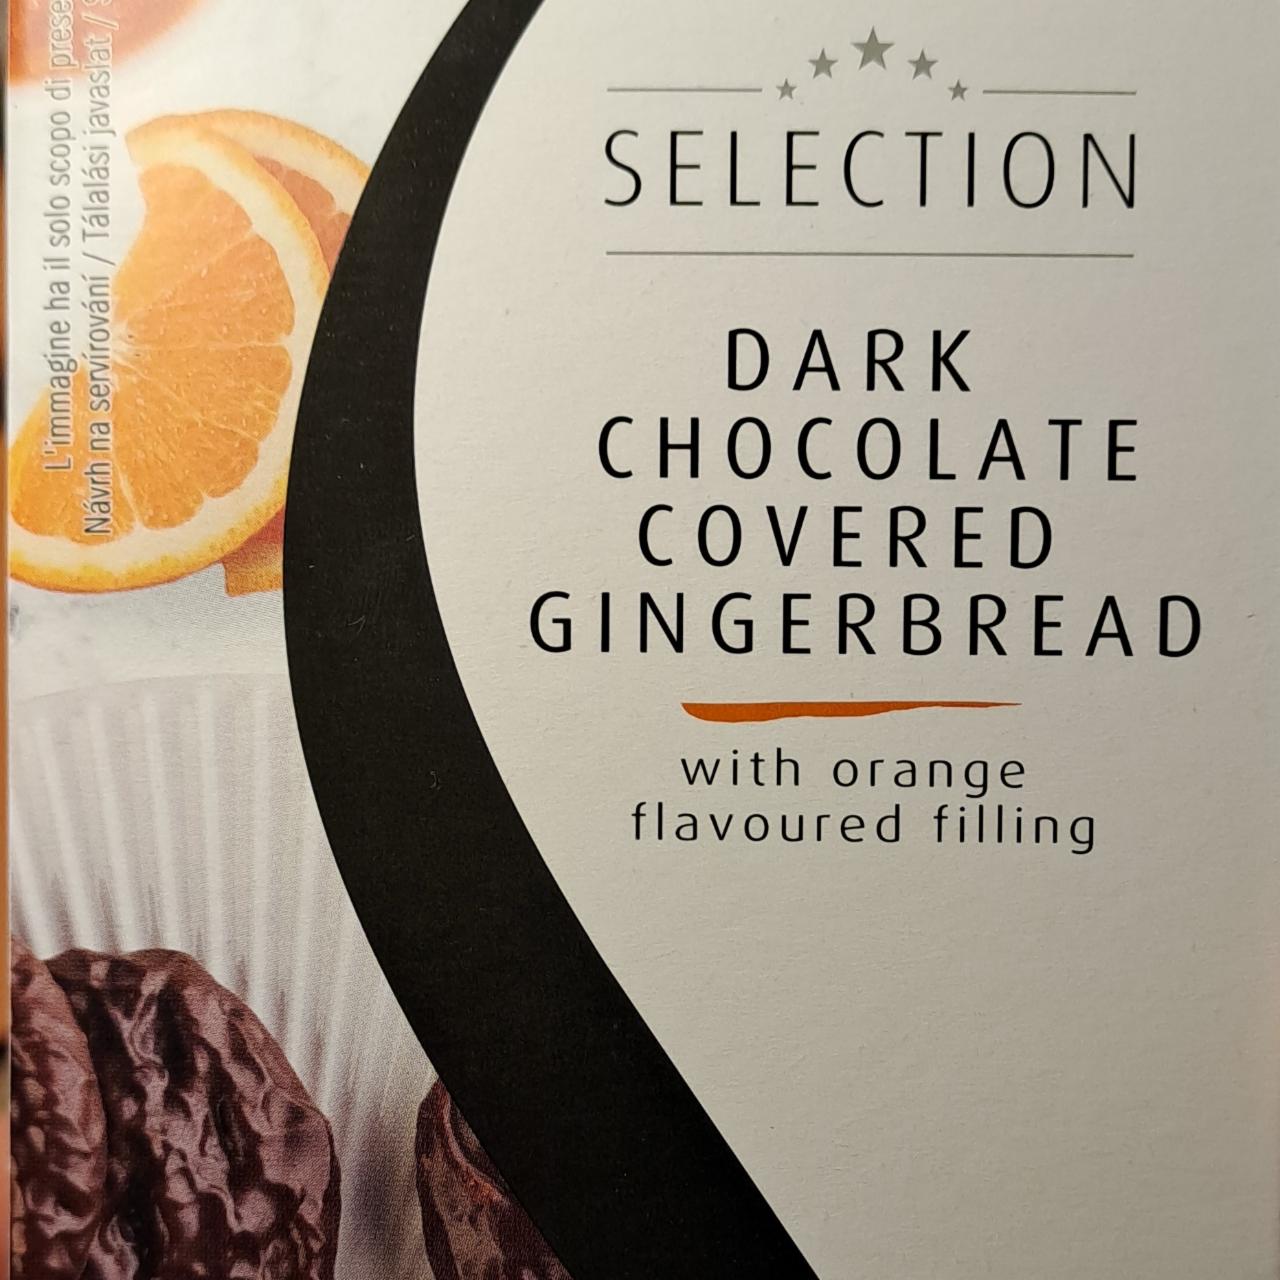 Képek - Dark chocolate covered gingerbread with orange flavoured filling Selection